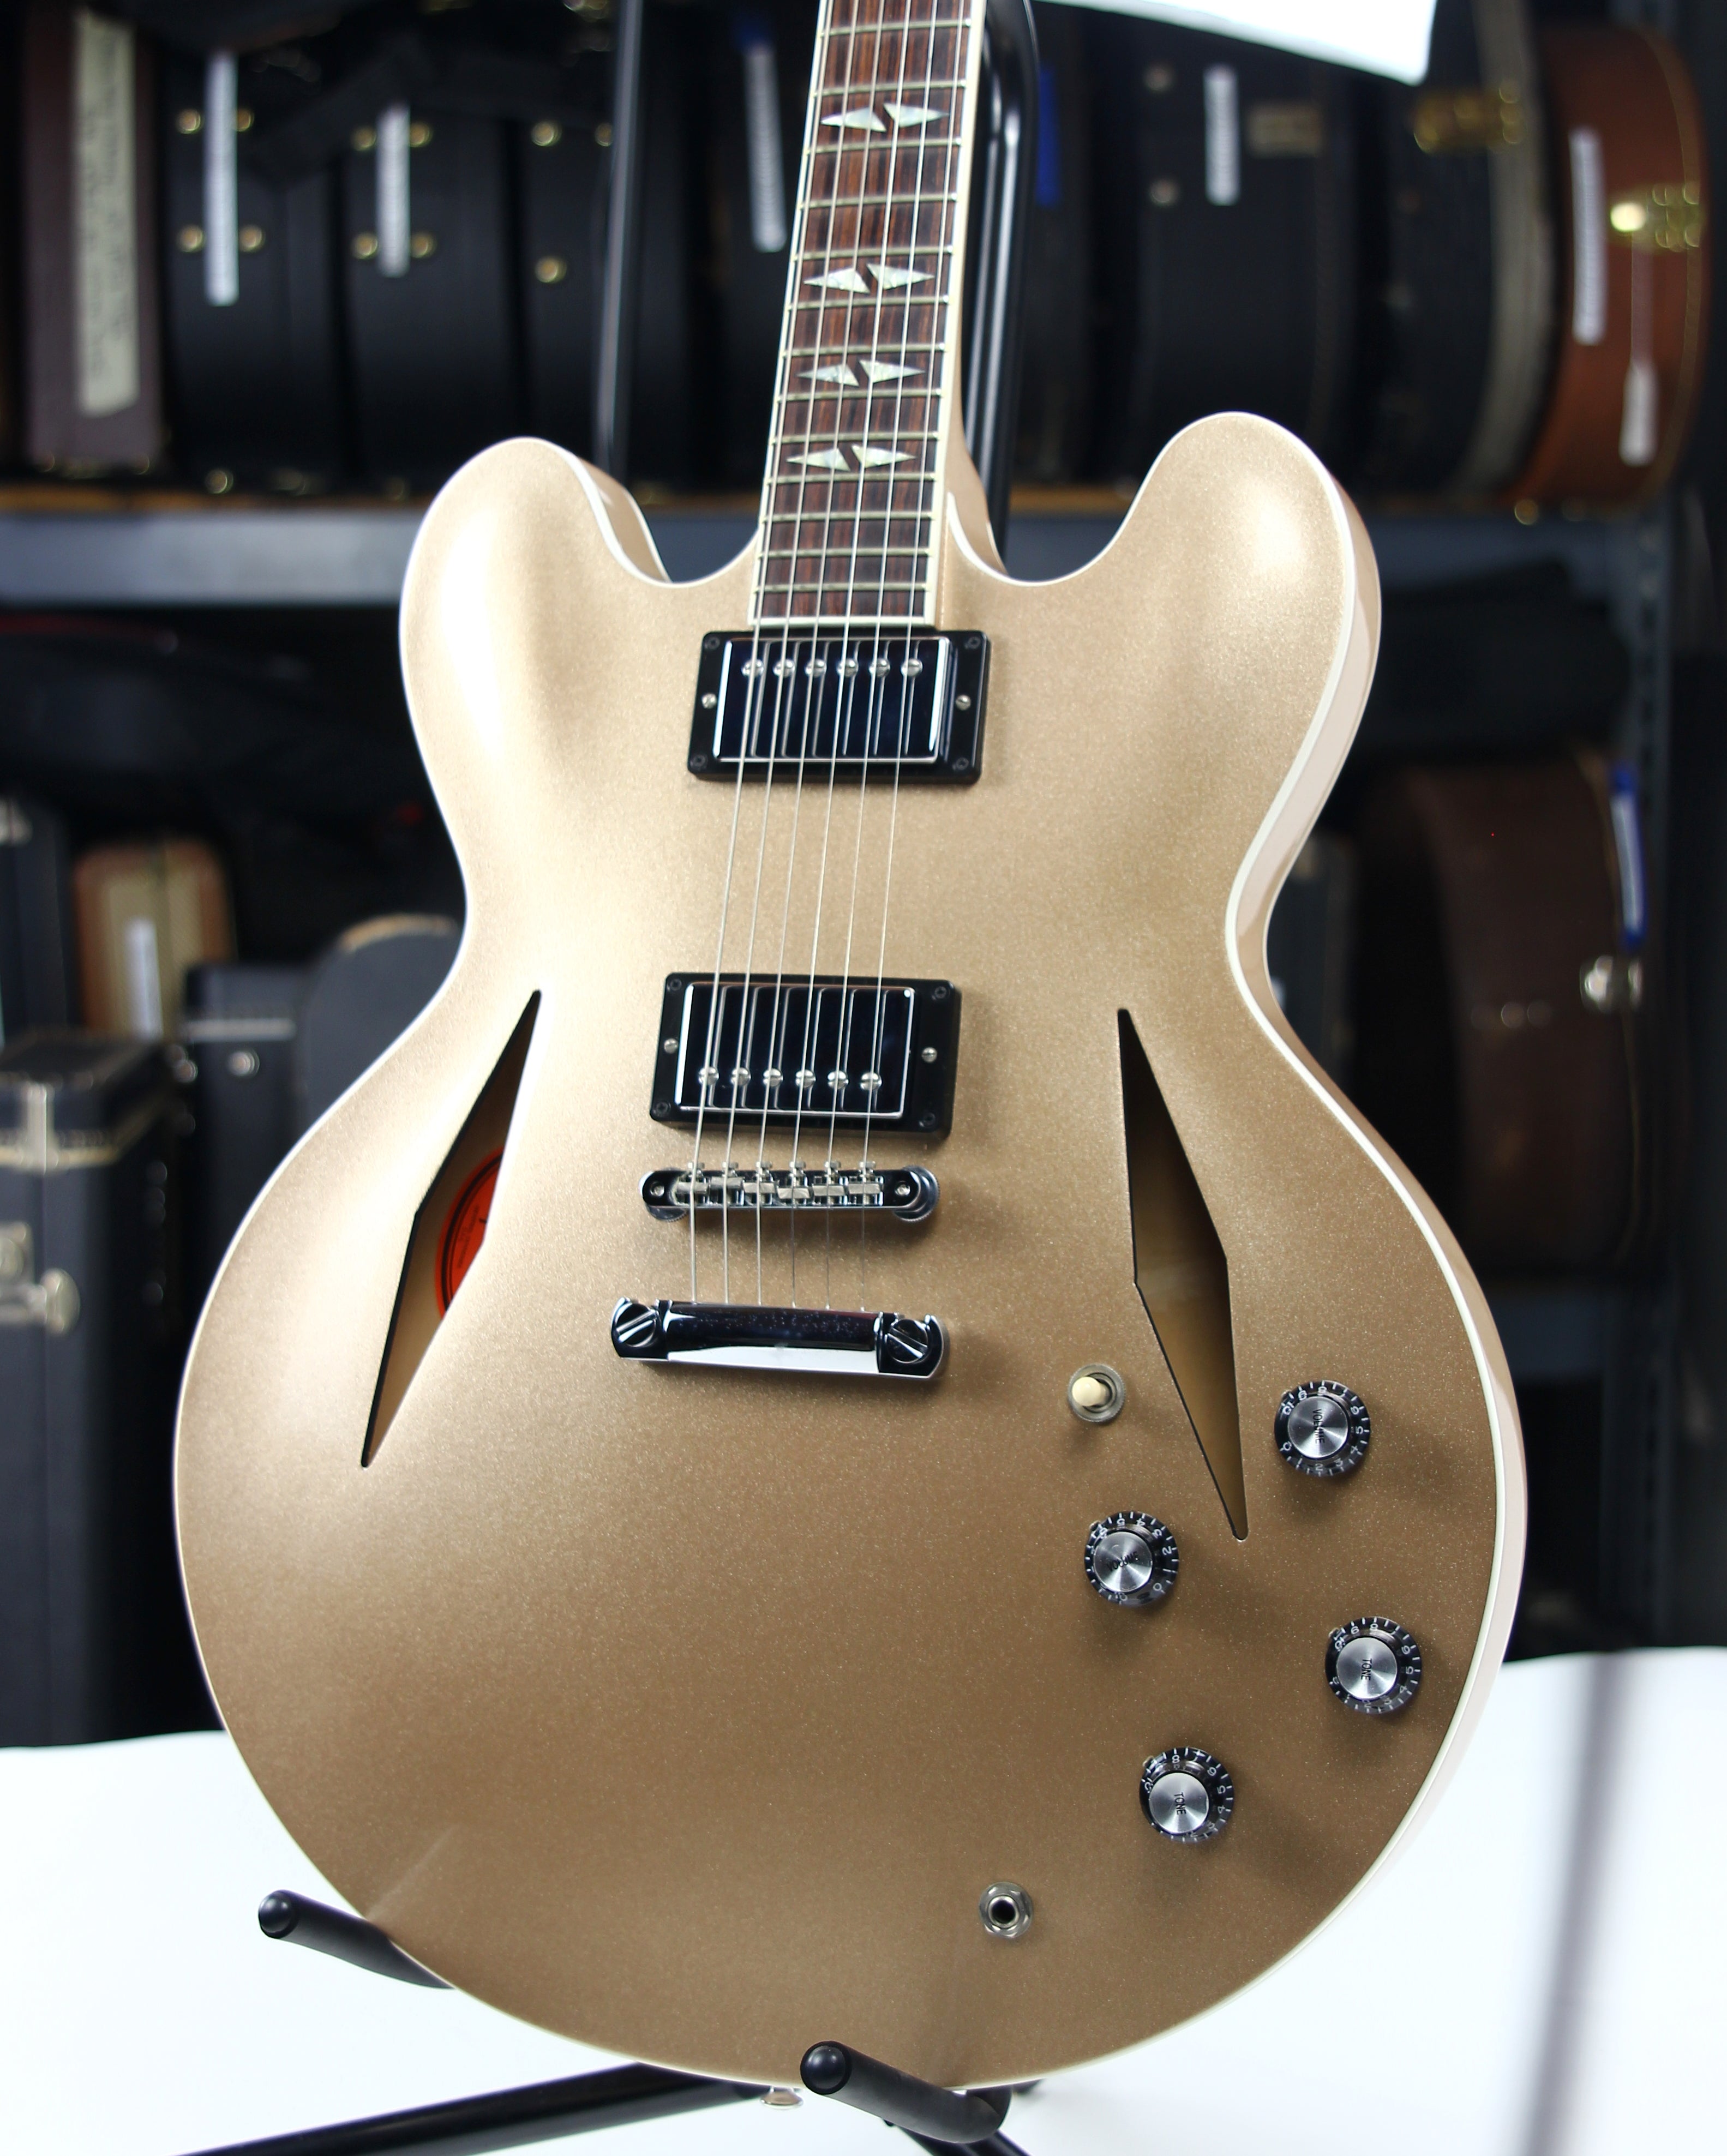 *SOLD*  2014 Gibson Dave Grohl Signature ES-335 Metallic Gold DG-335 - Limited Edition Memphis Trini Lopez